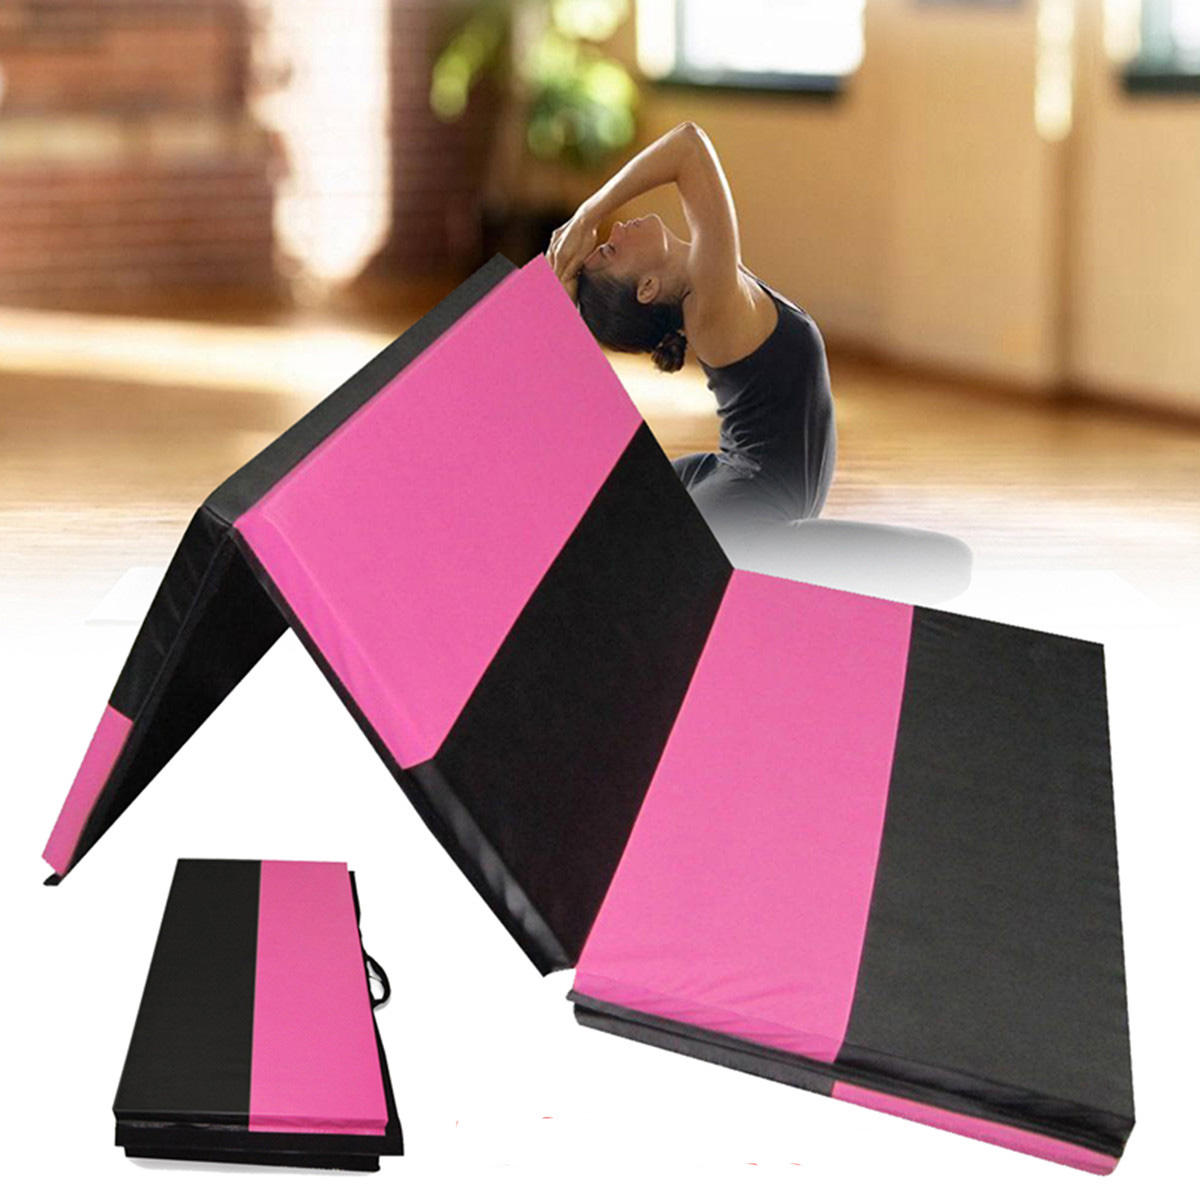 70x47x1.97inch Foldable Gymnastic Mat Exercise Yoga Fitness Workout Tumbling Pad